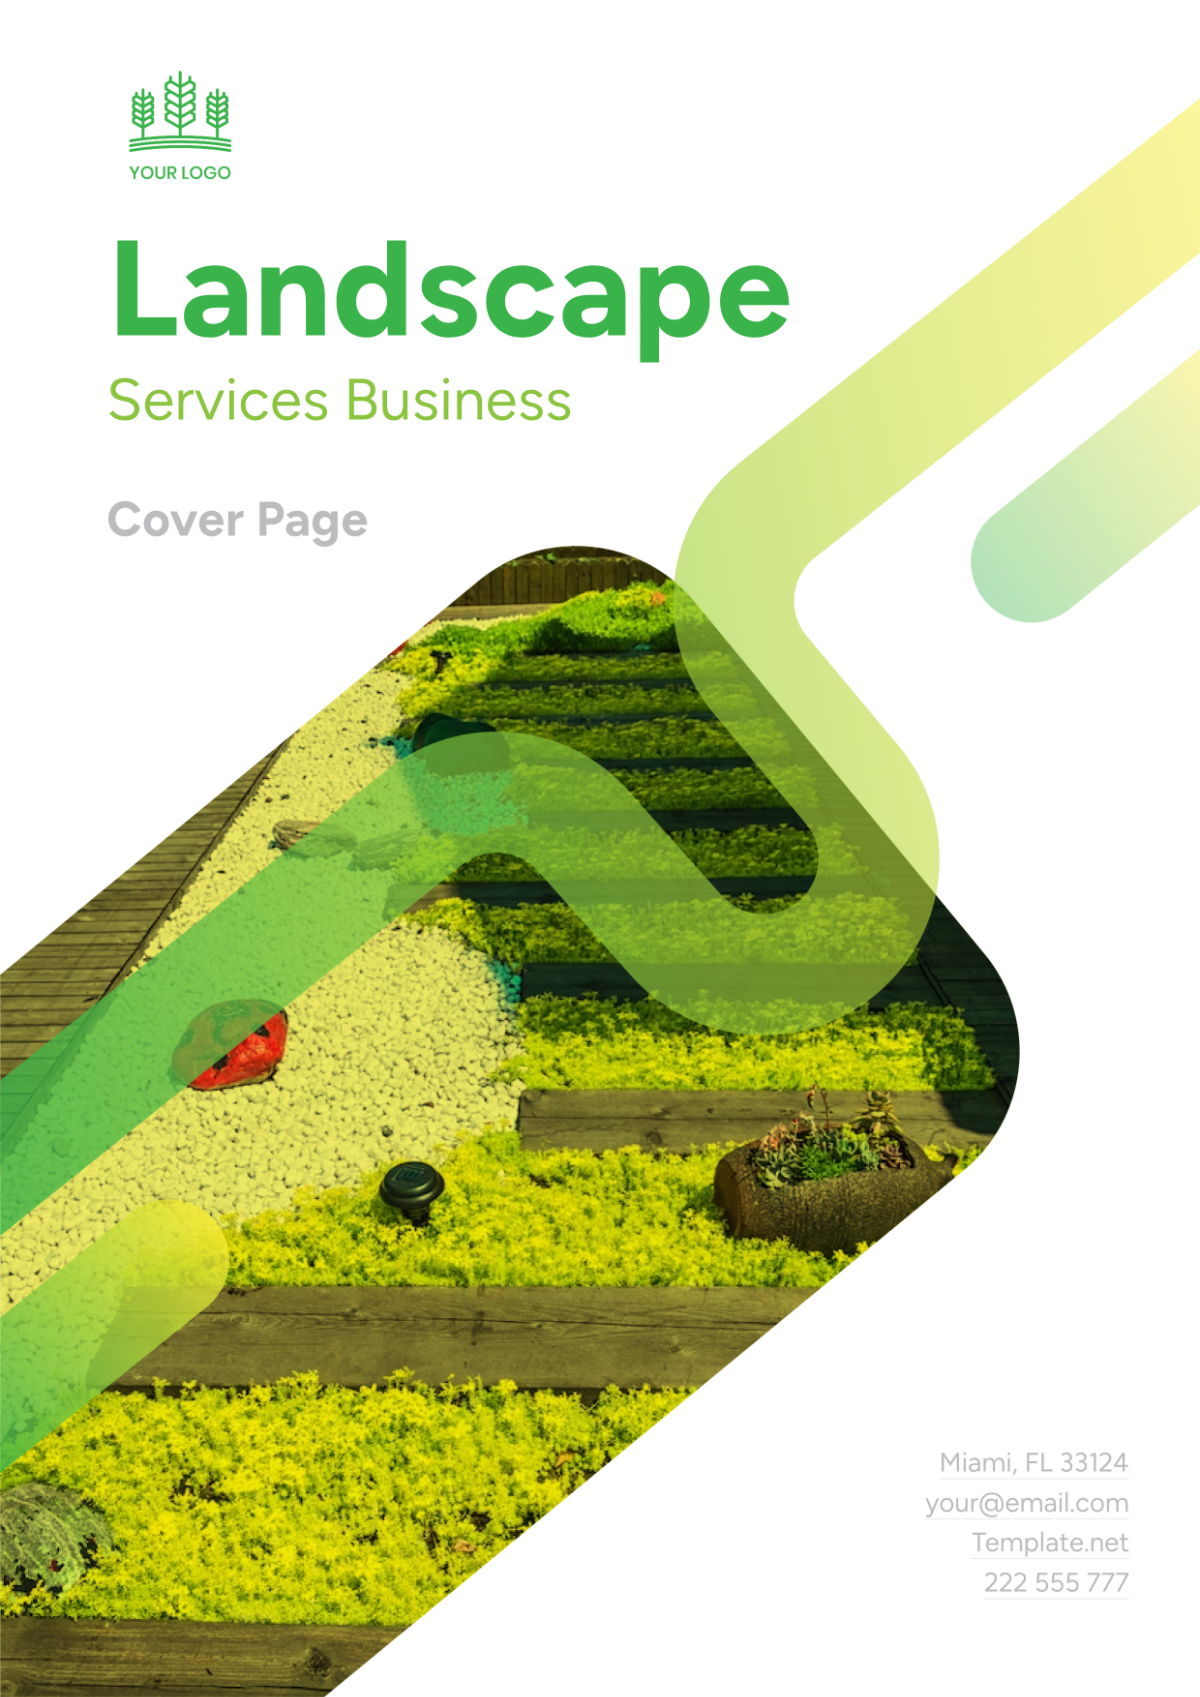 Landscape Services Business Cover Page Template